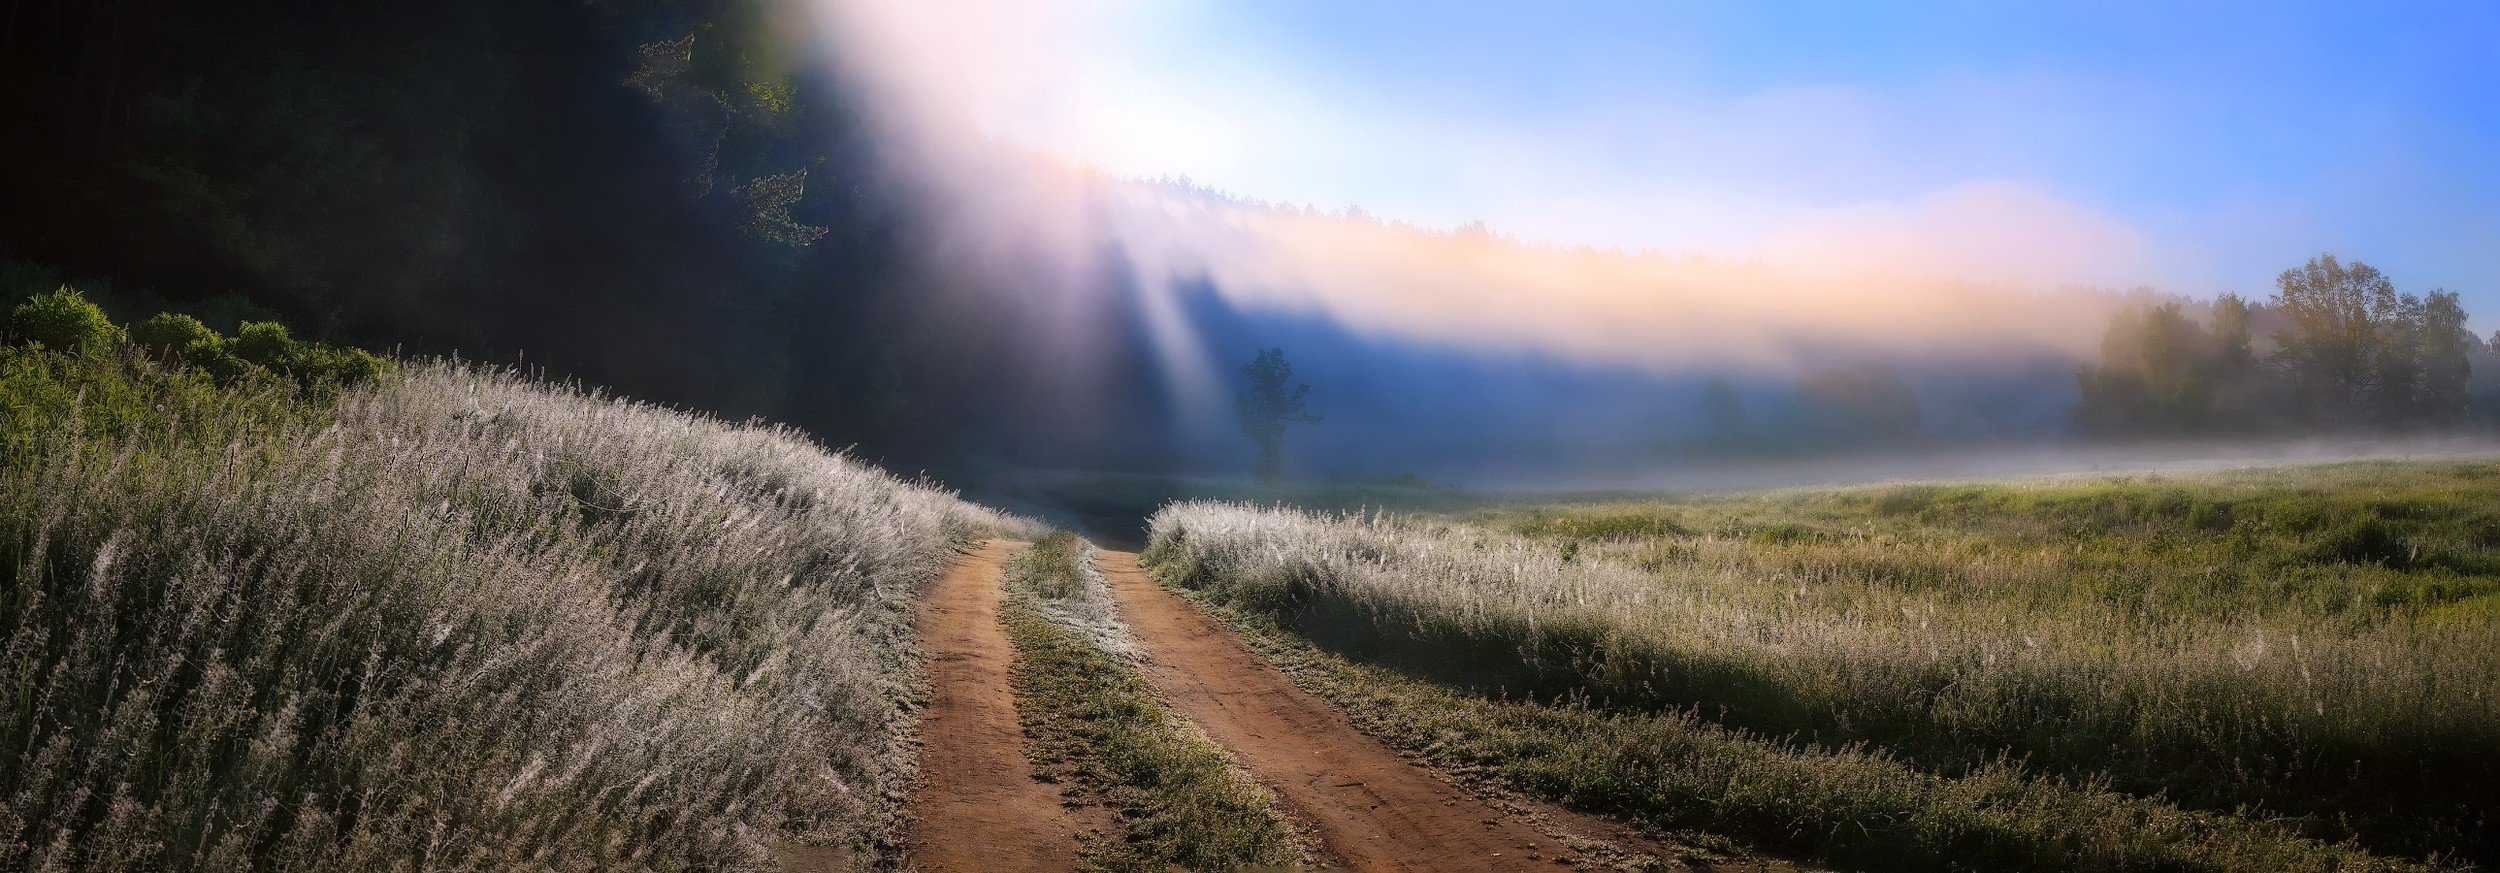 nature, Photography, Landscape, Morning, Dirt road, Grass, Mist, Sun rays, Trees, Panorama Wallpaper